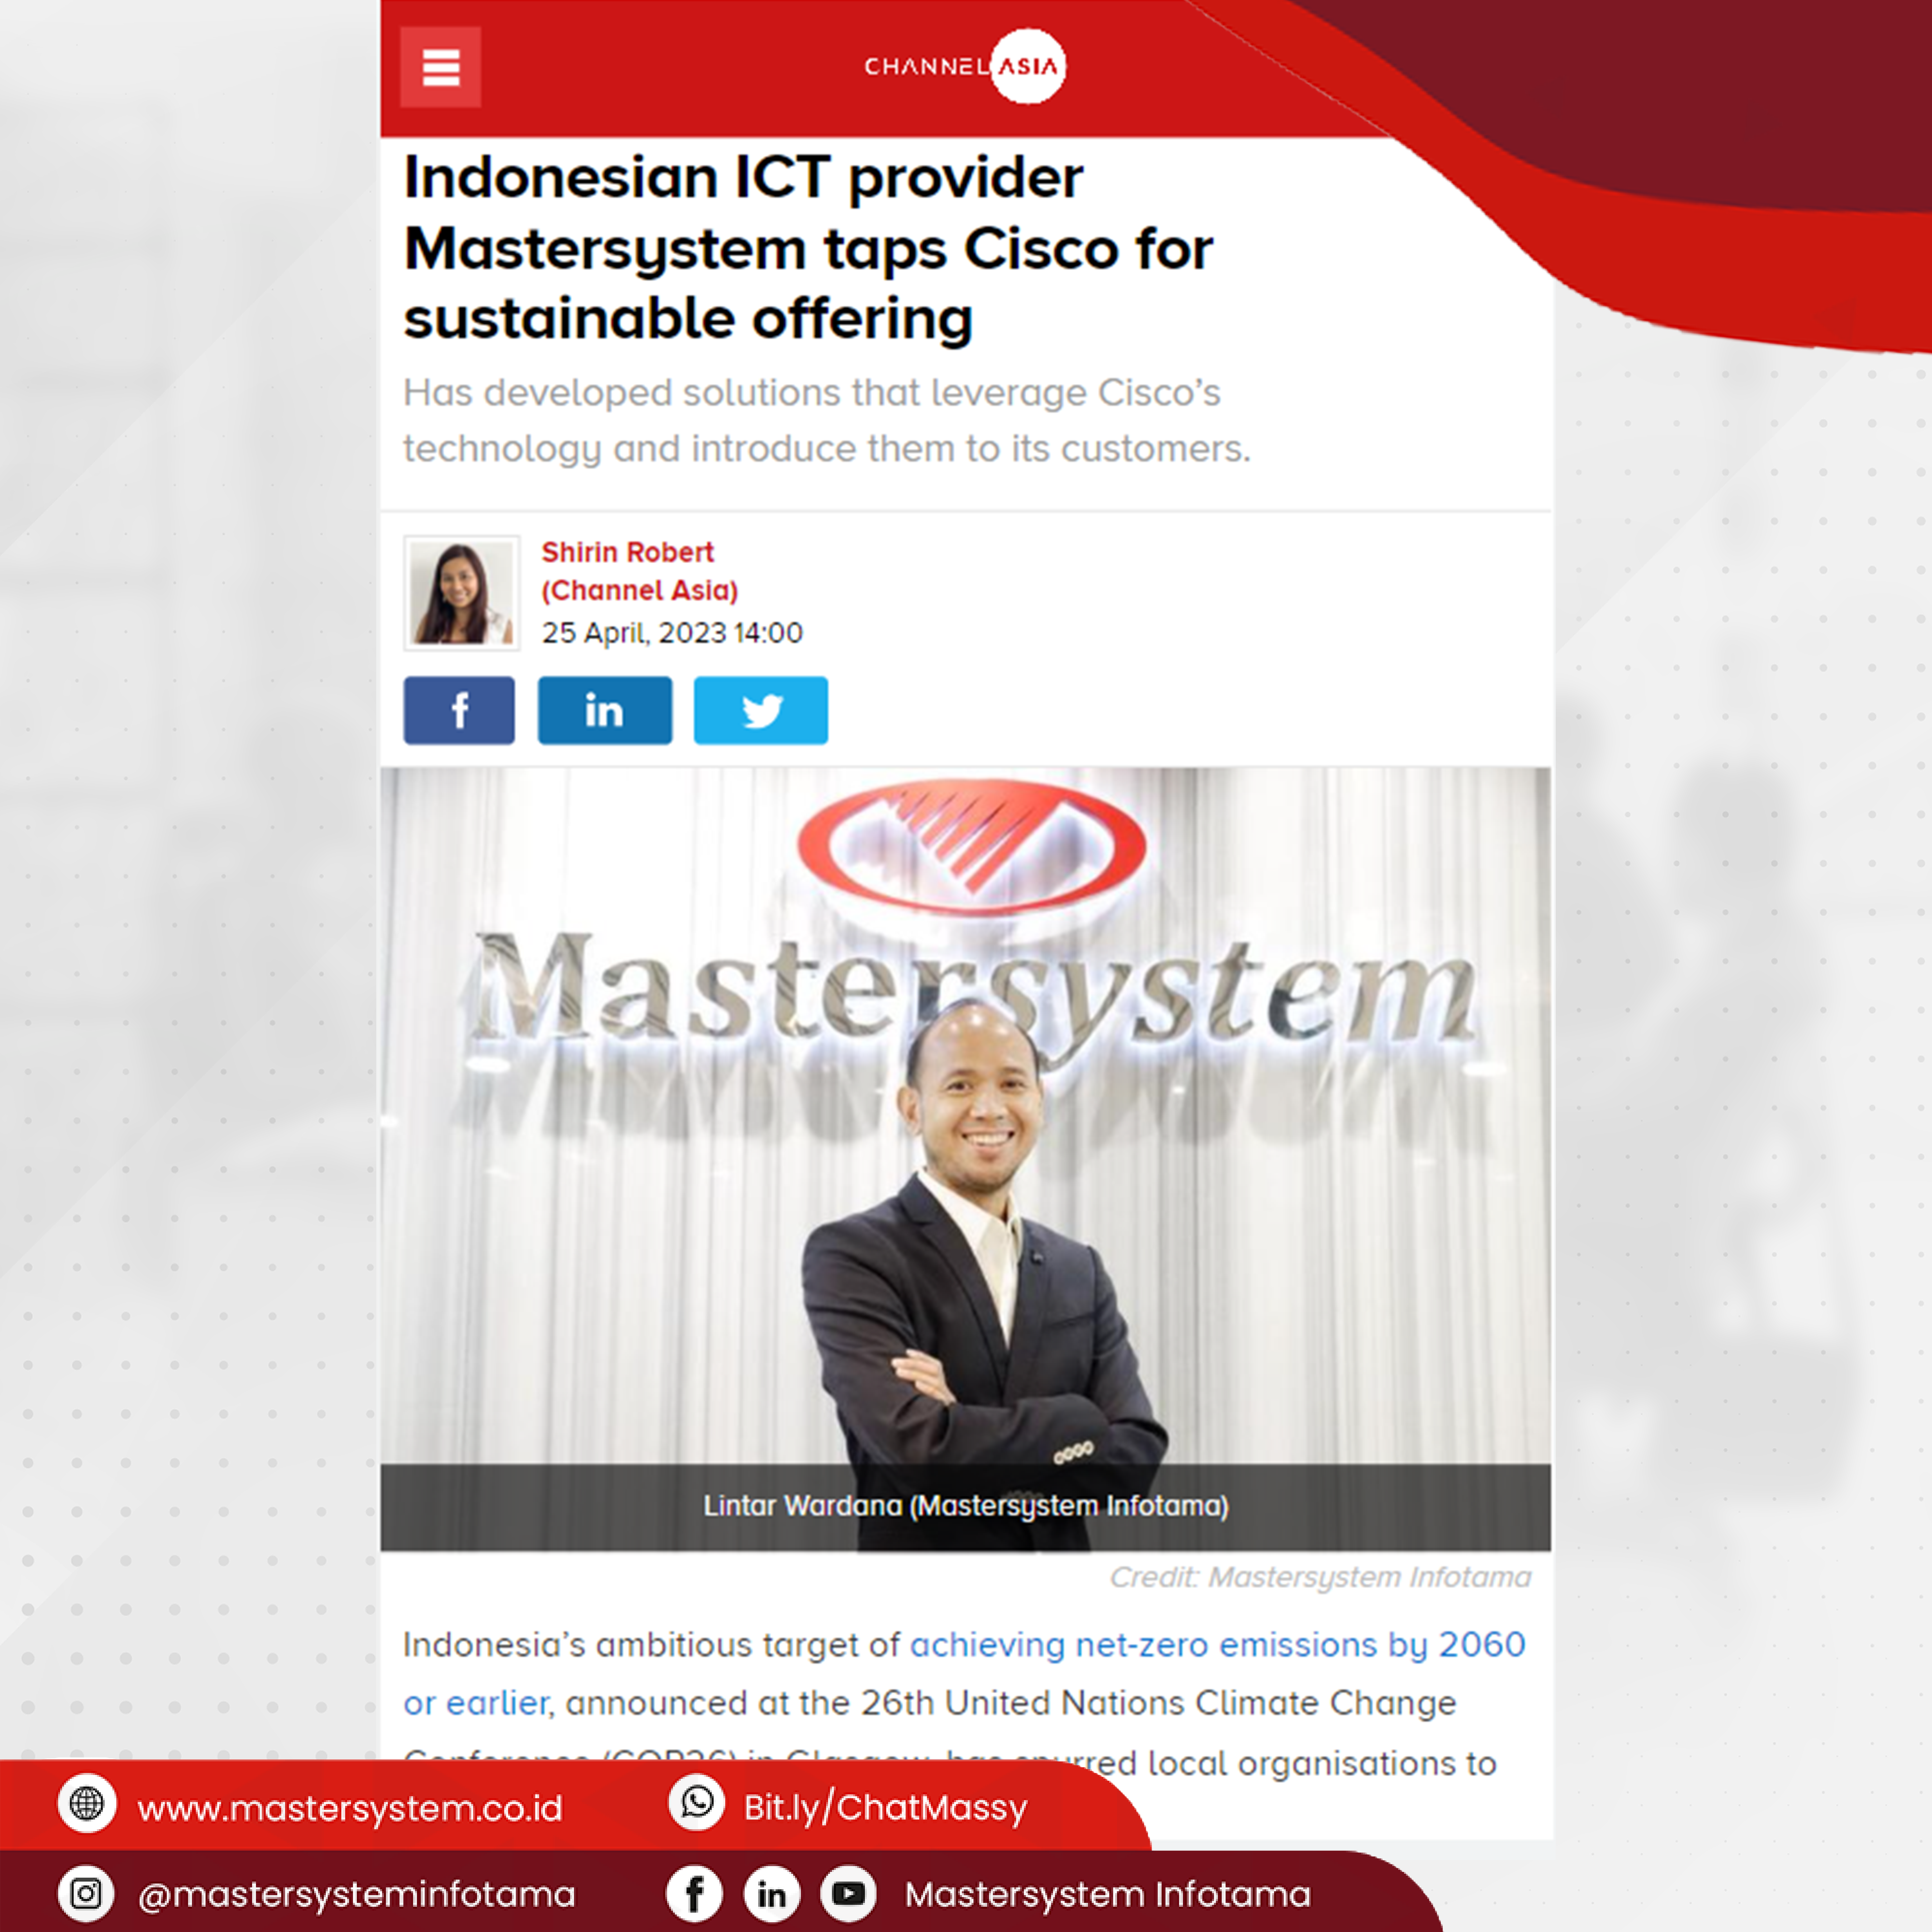 Indonesian ICT provider Mastersystem taps Cisco for sustainable offering